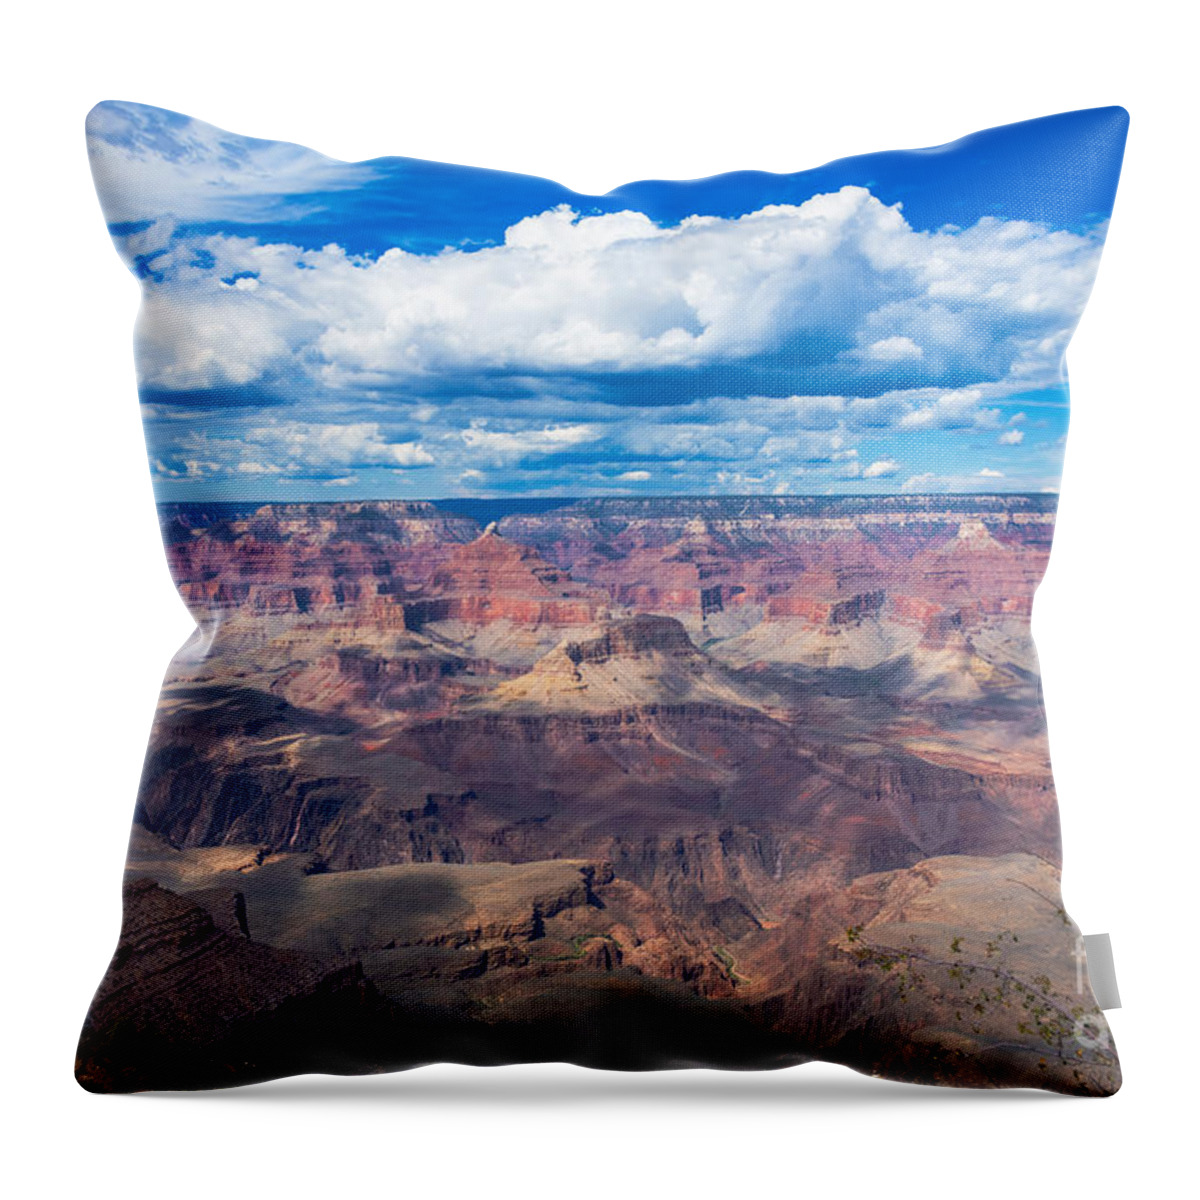 Grand Canyon Throw Pillow featuring the digital art Grand Canyon by Tammy Keyes